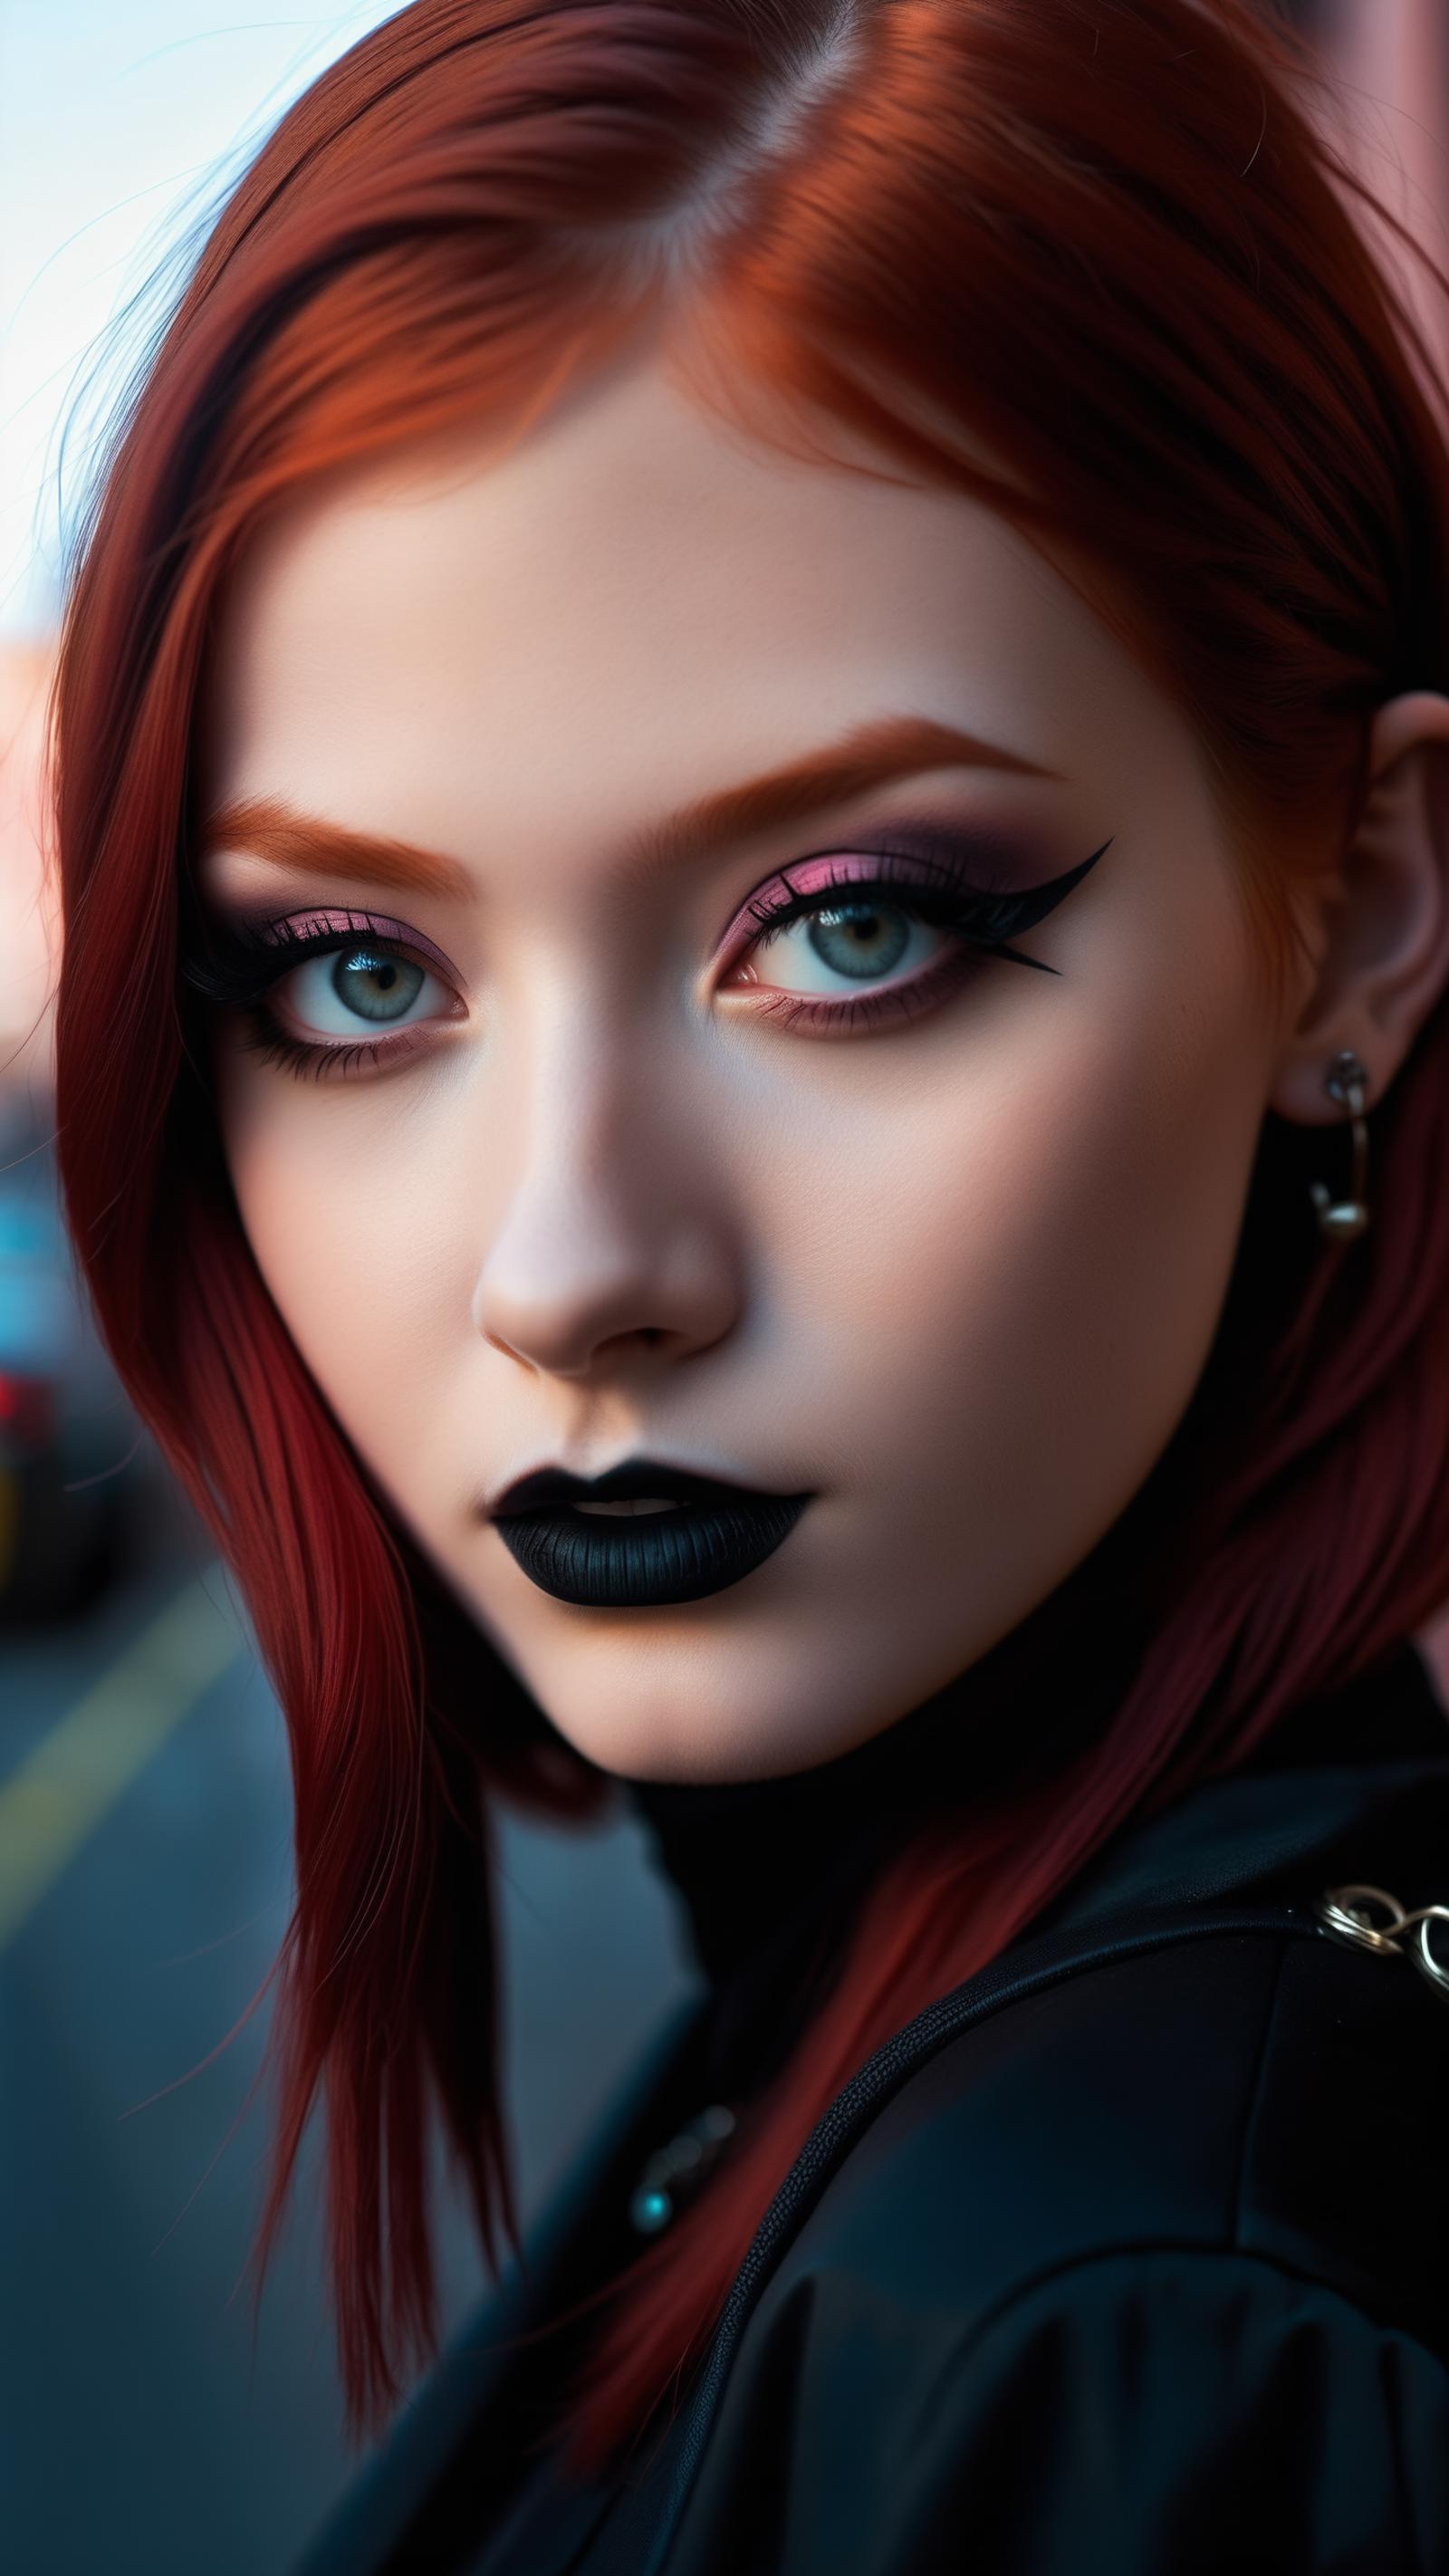 A woman with red hair and black lipstick looking at the camera.